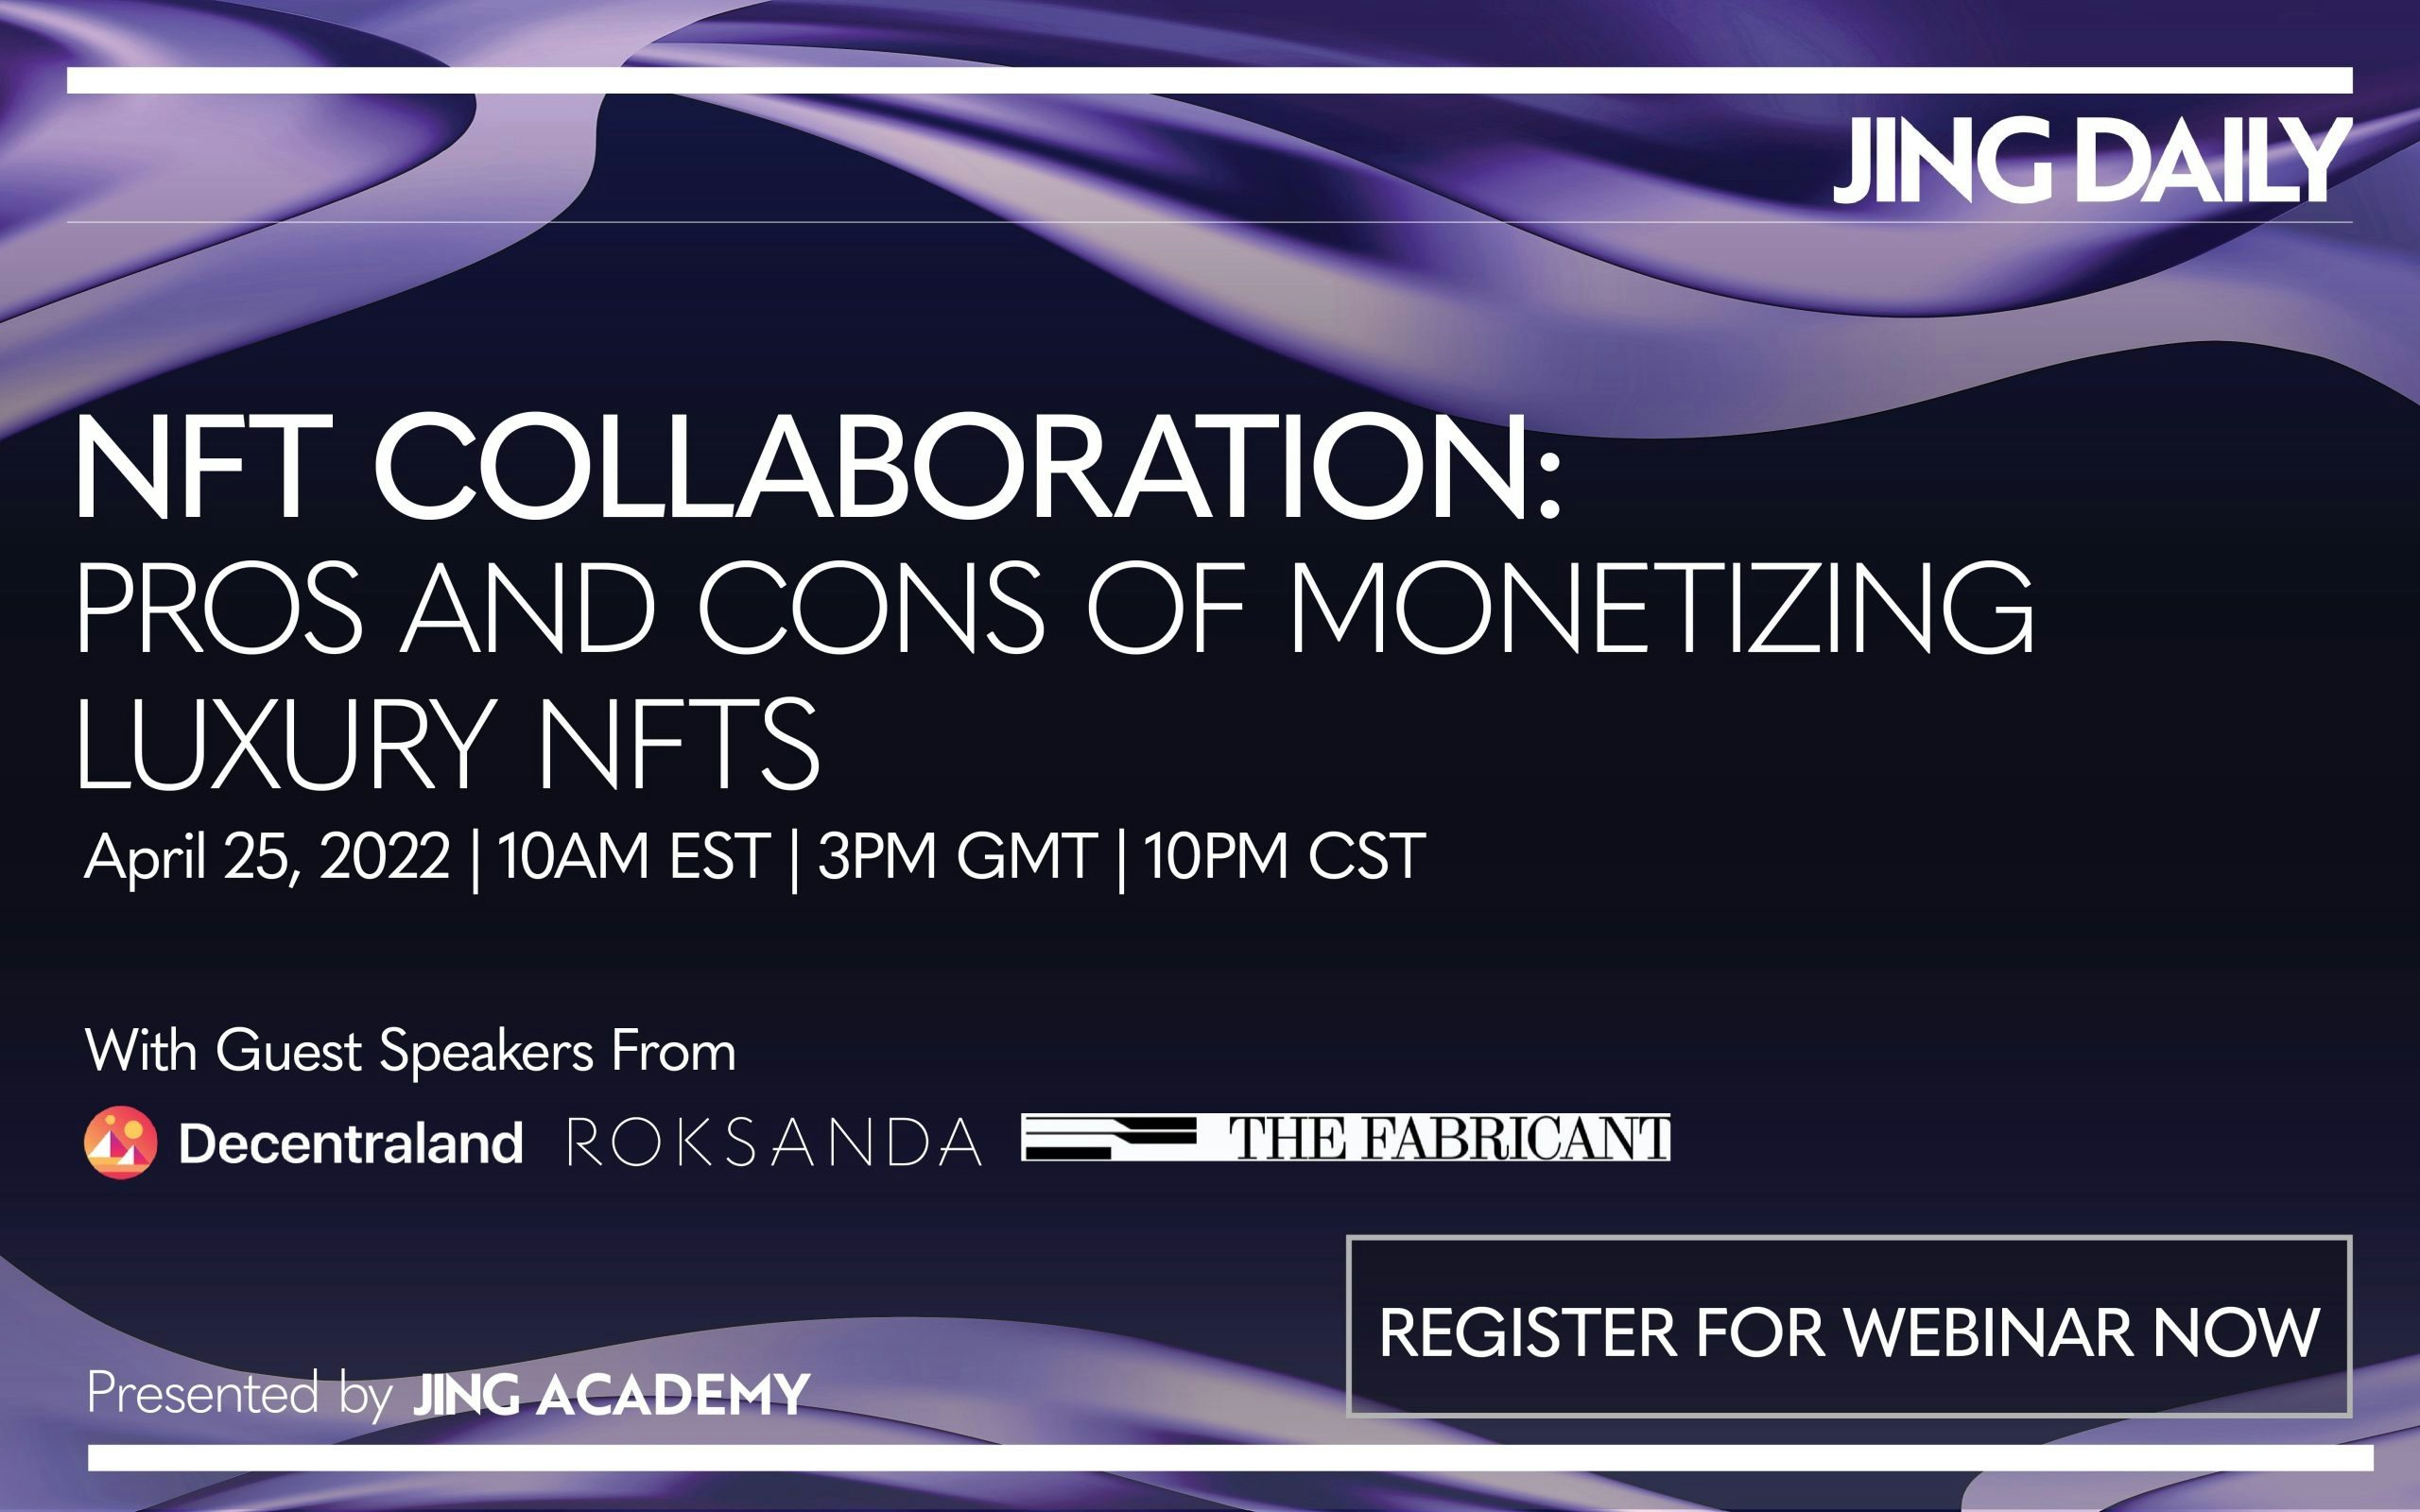 On Monday, April 25, join Jing Daily’s guest panel of expert speakers for the Pros and Cons of Monetizing Luxury NFTs webinar. 